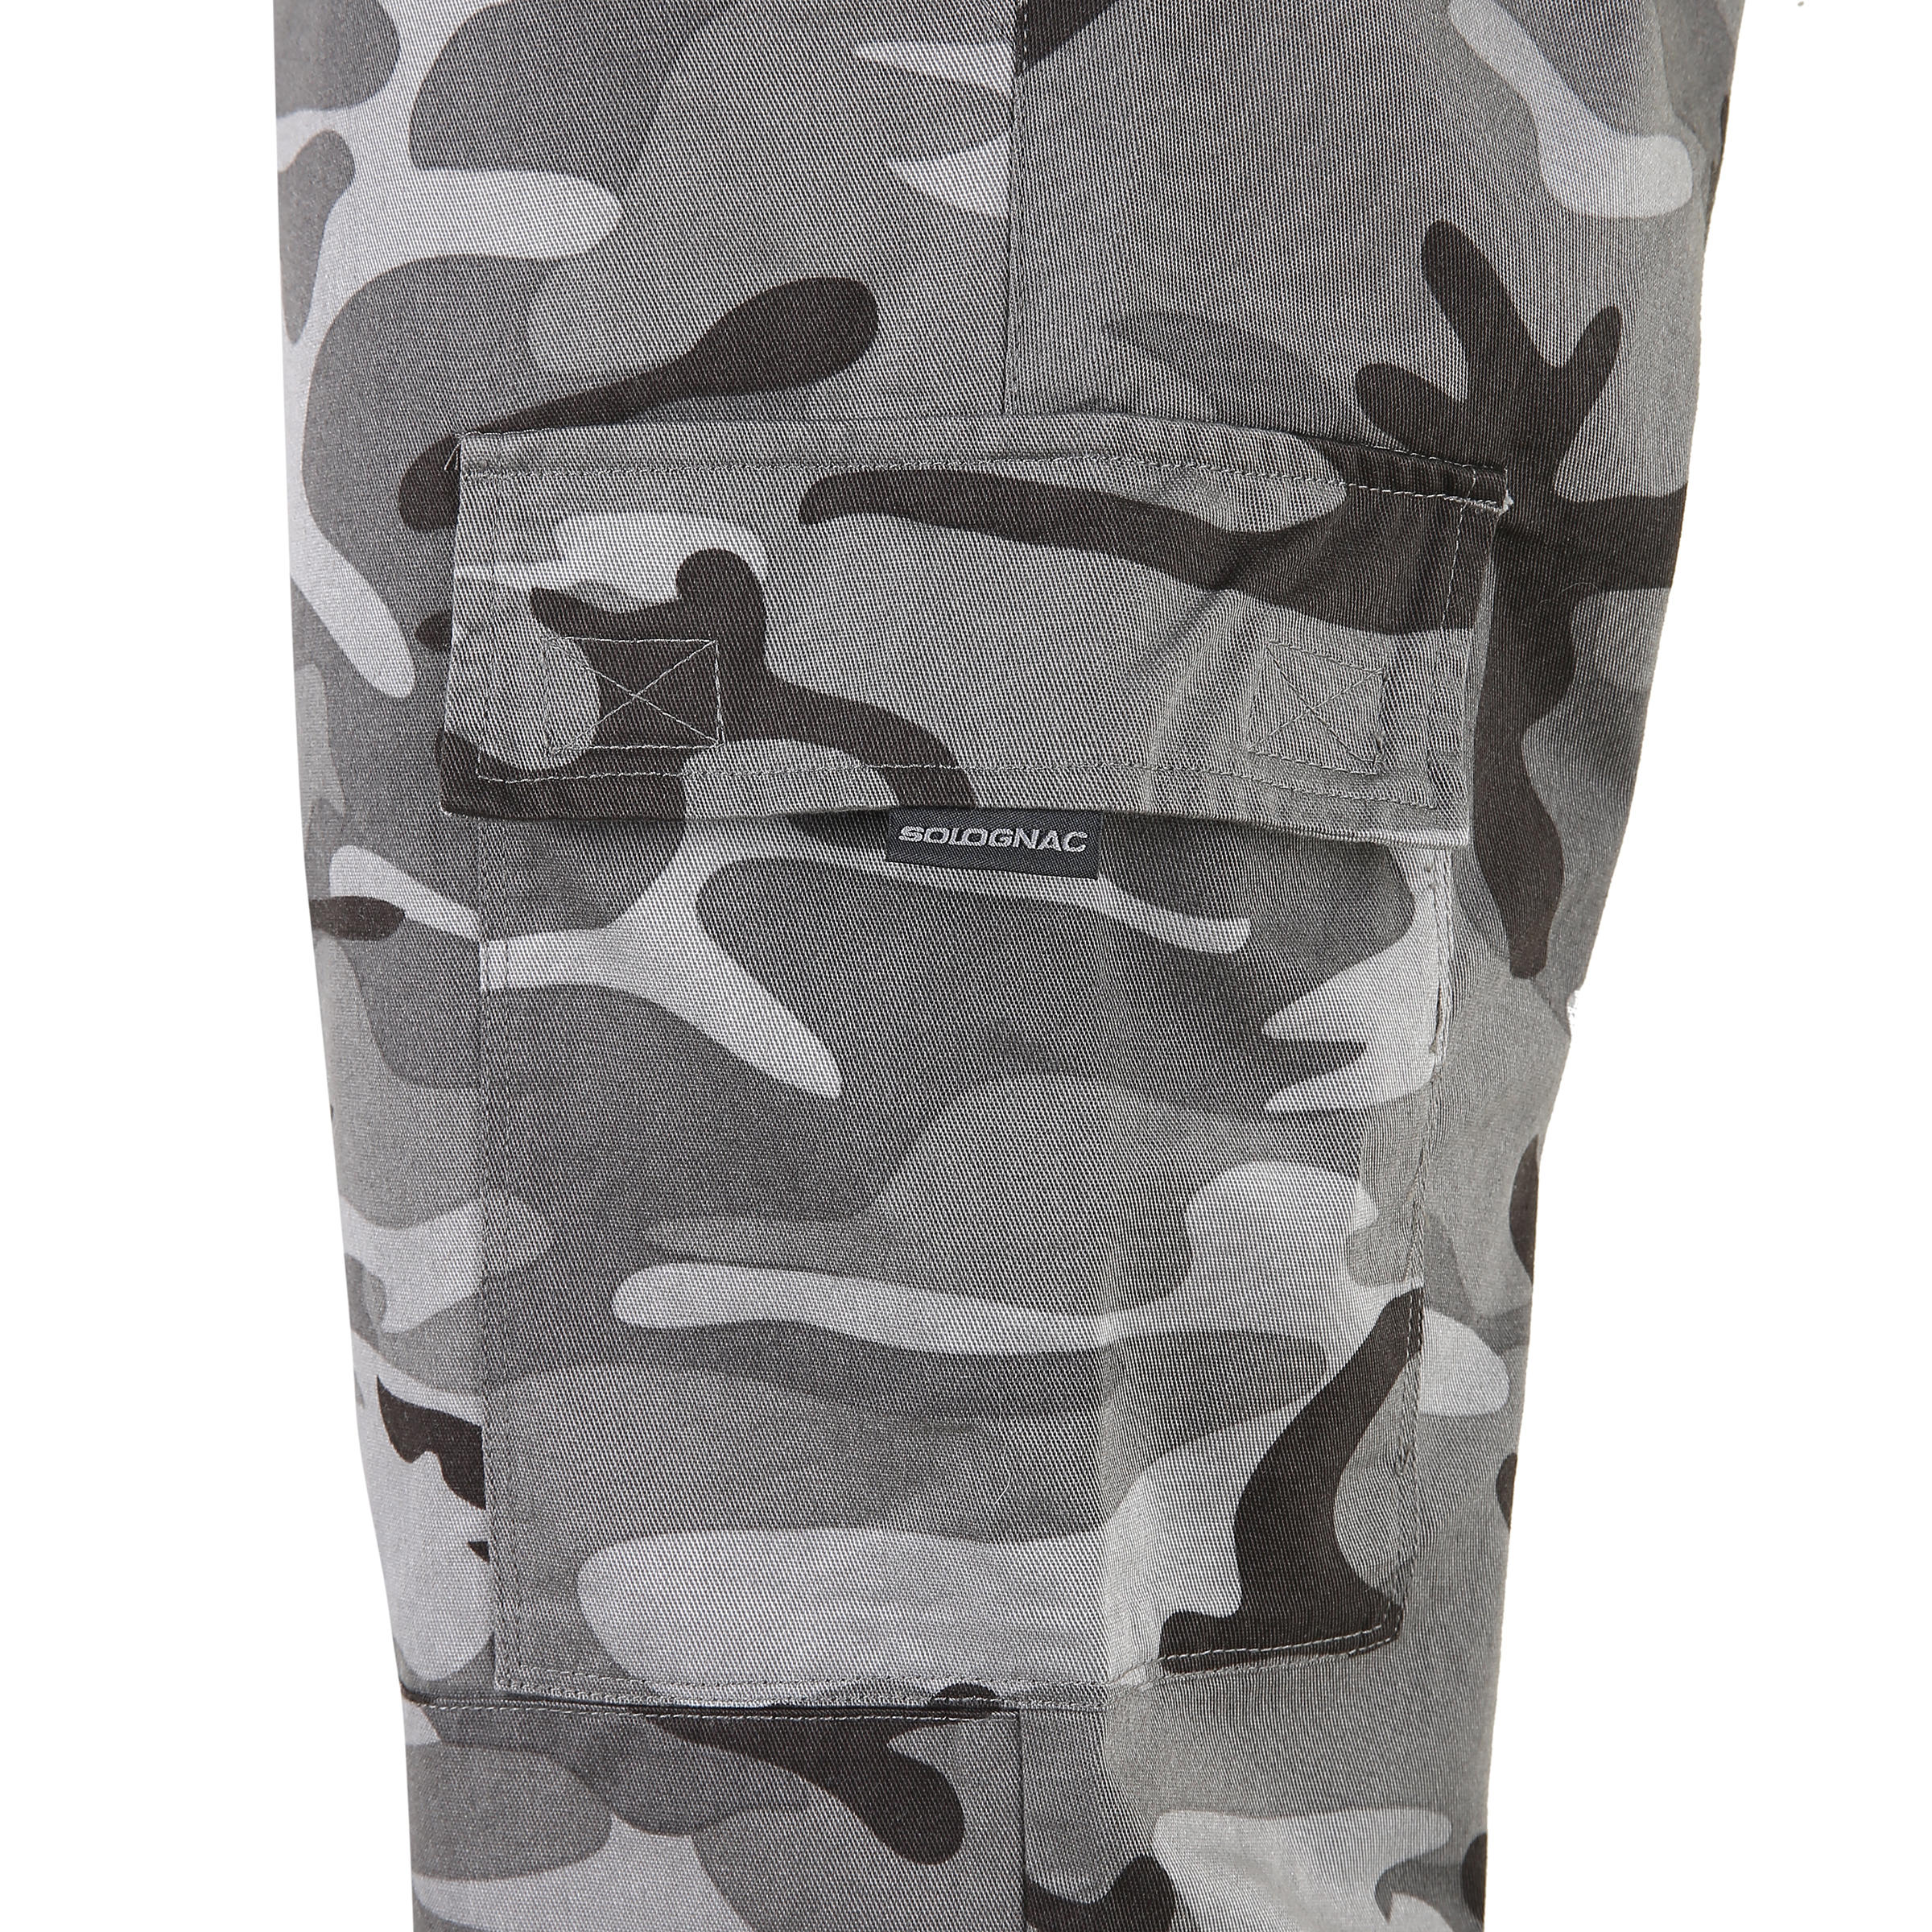 Buy 38 X 30 70s Reversible Camouflage Hunting Pants  1970s Ranger Online  in India  Etsy